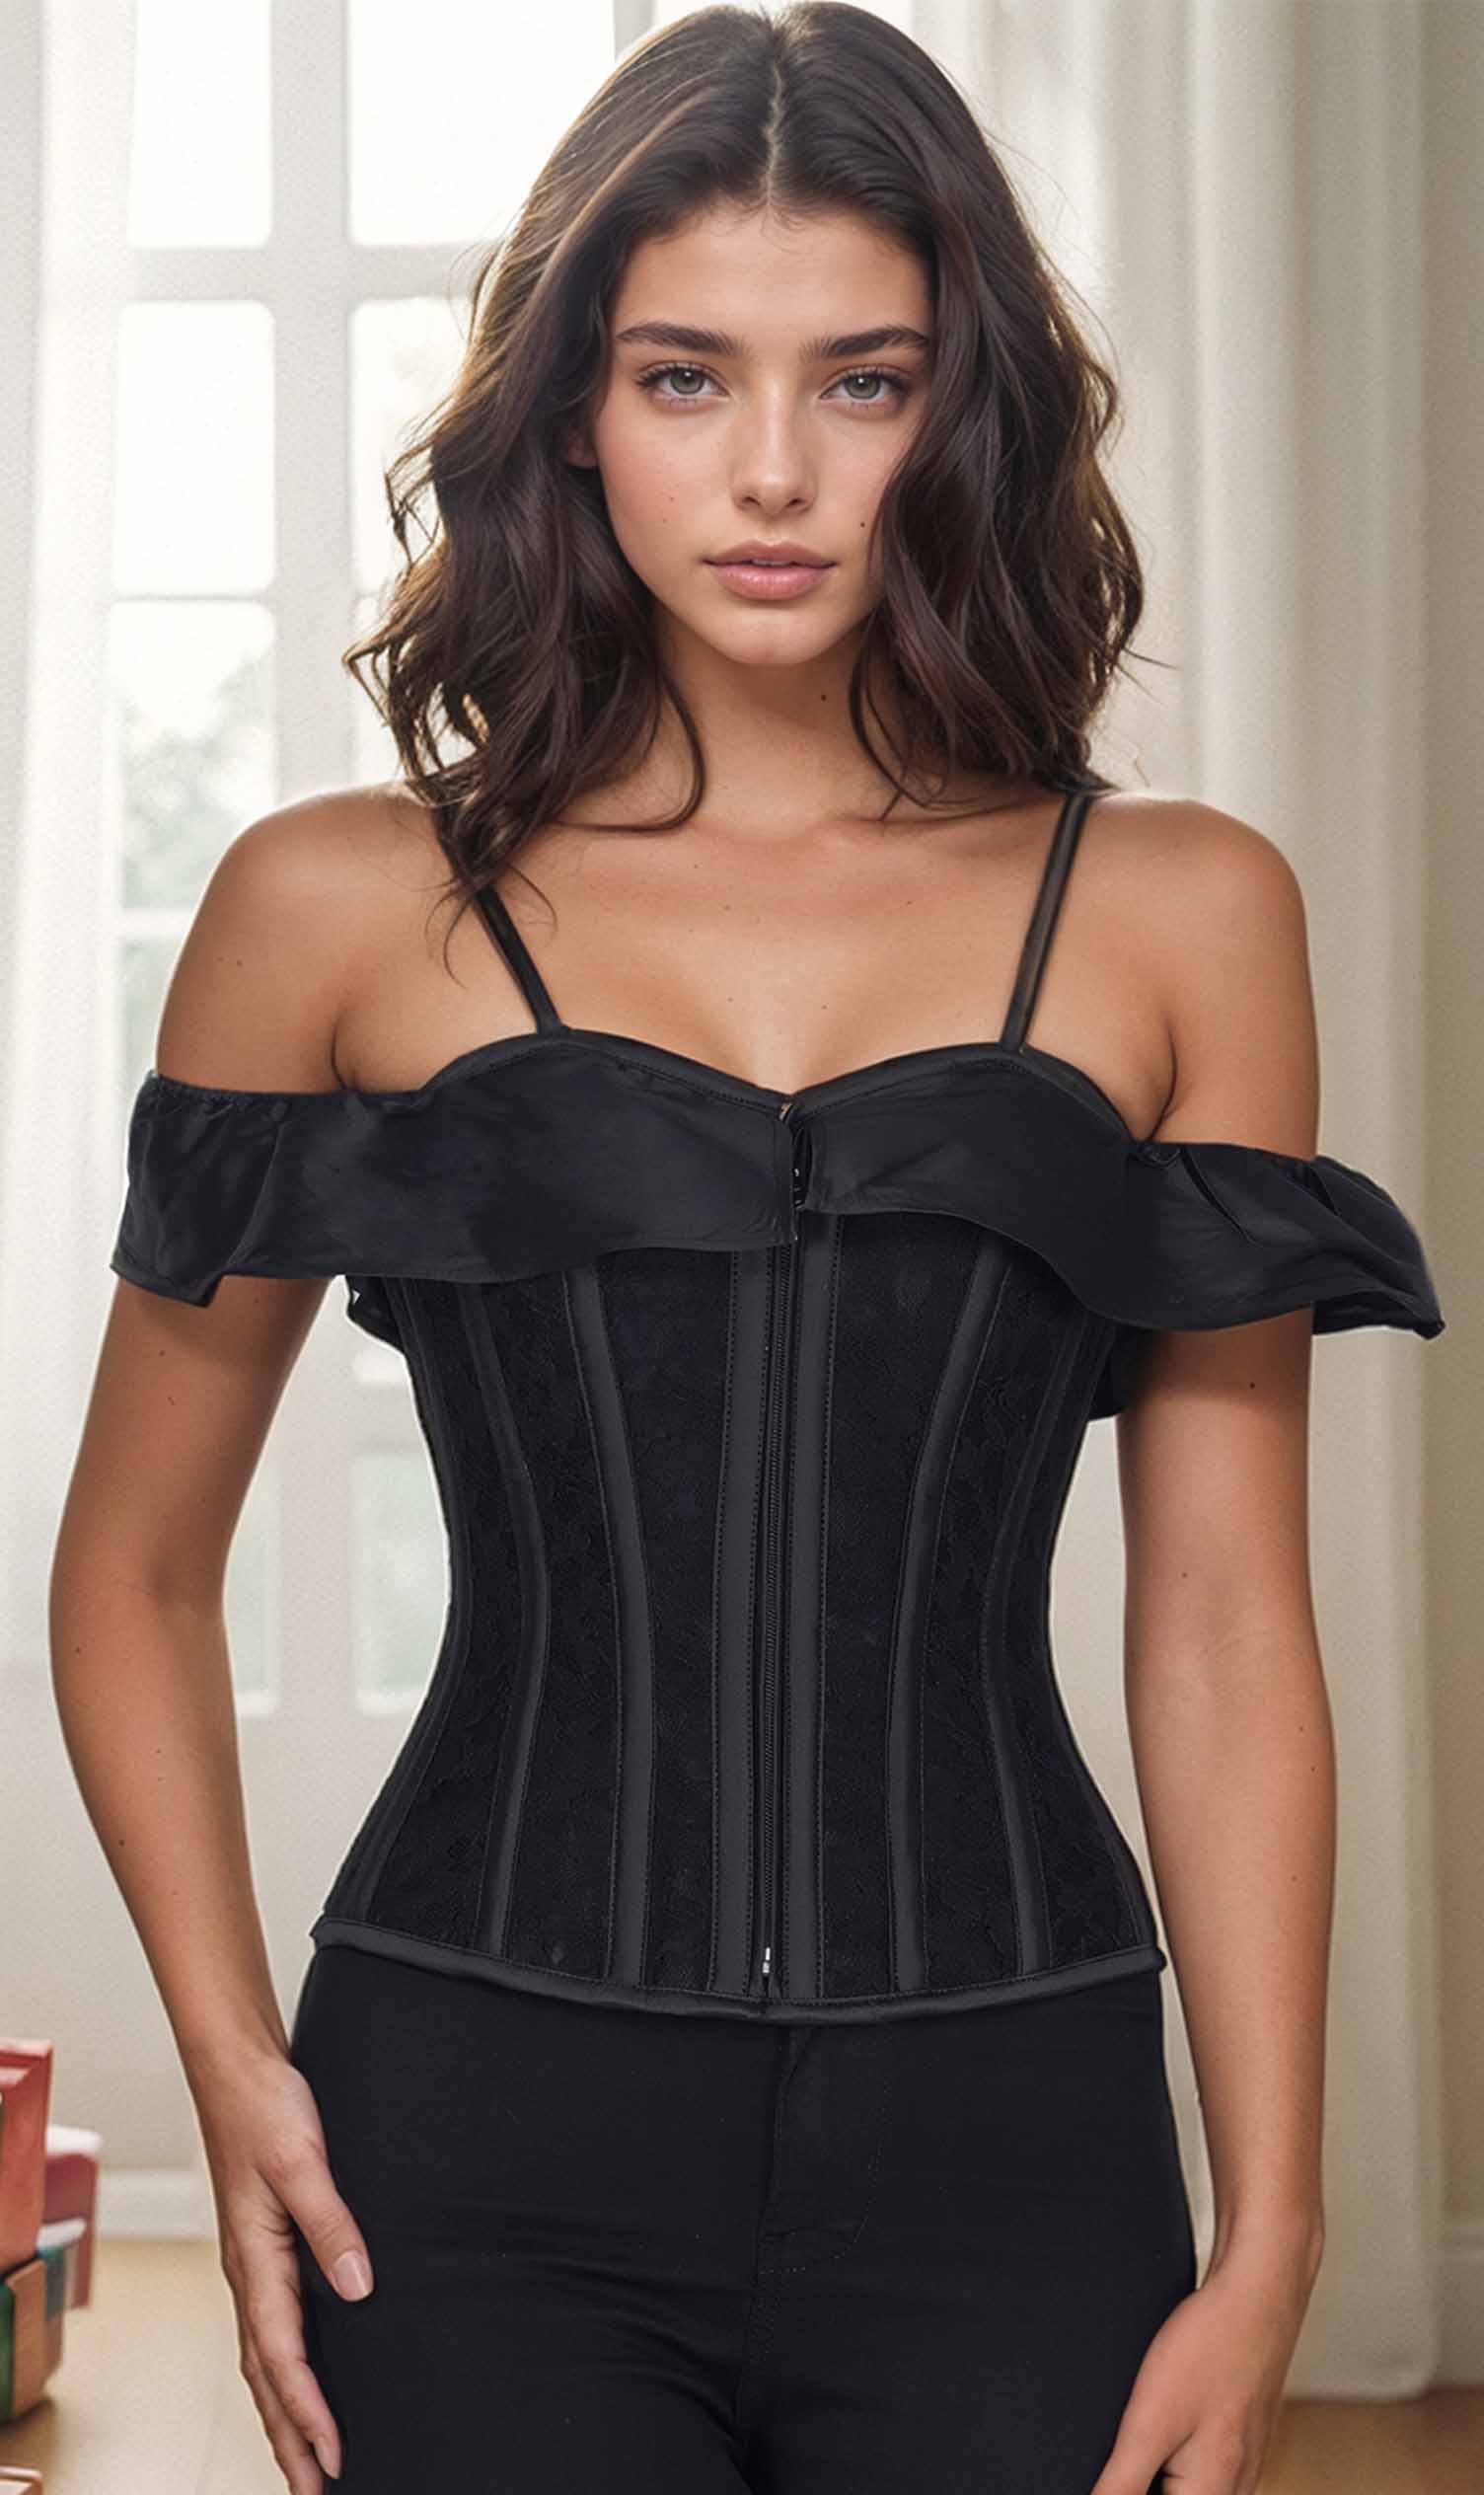 We have Custom Made Corset & Underbust Black Corset for you right here